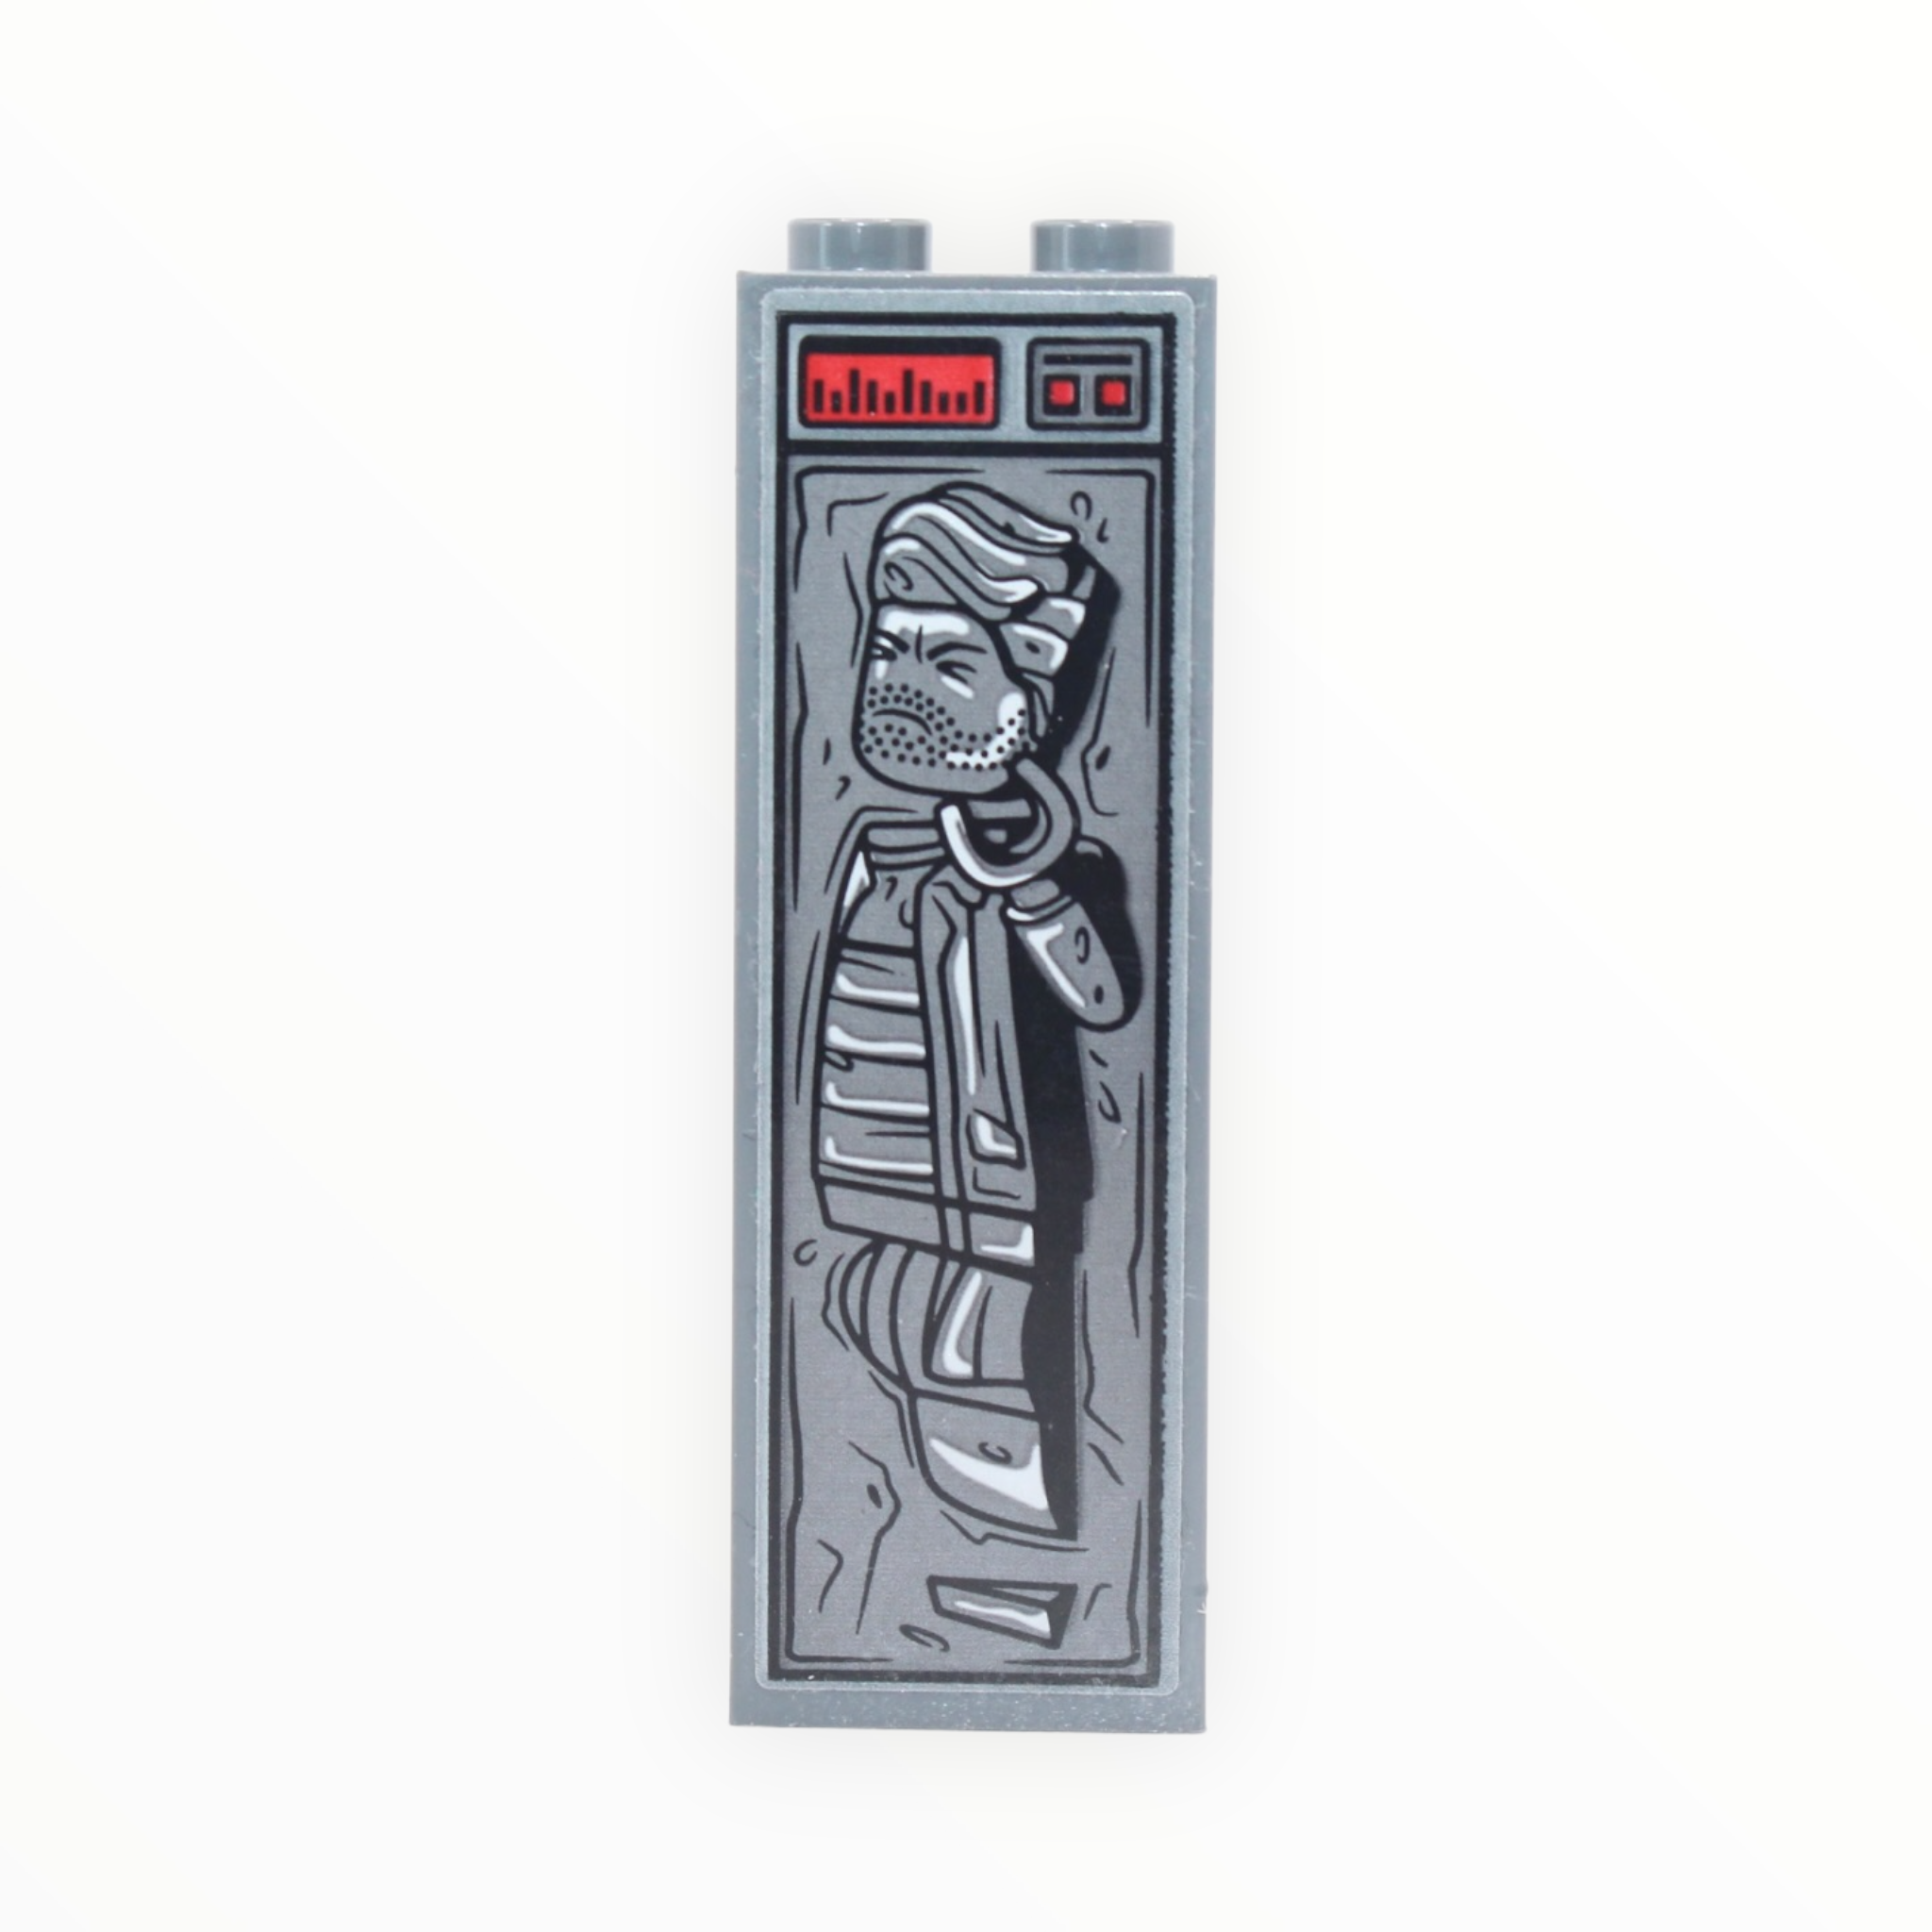 Human in Carbonite (1x2x5 brick with sticker, 2020)